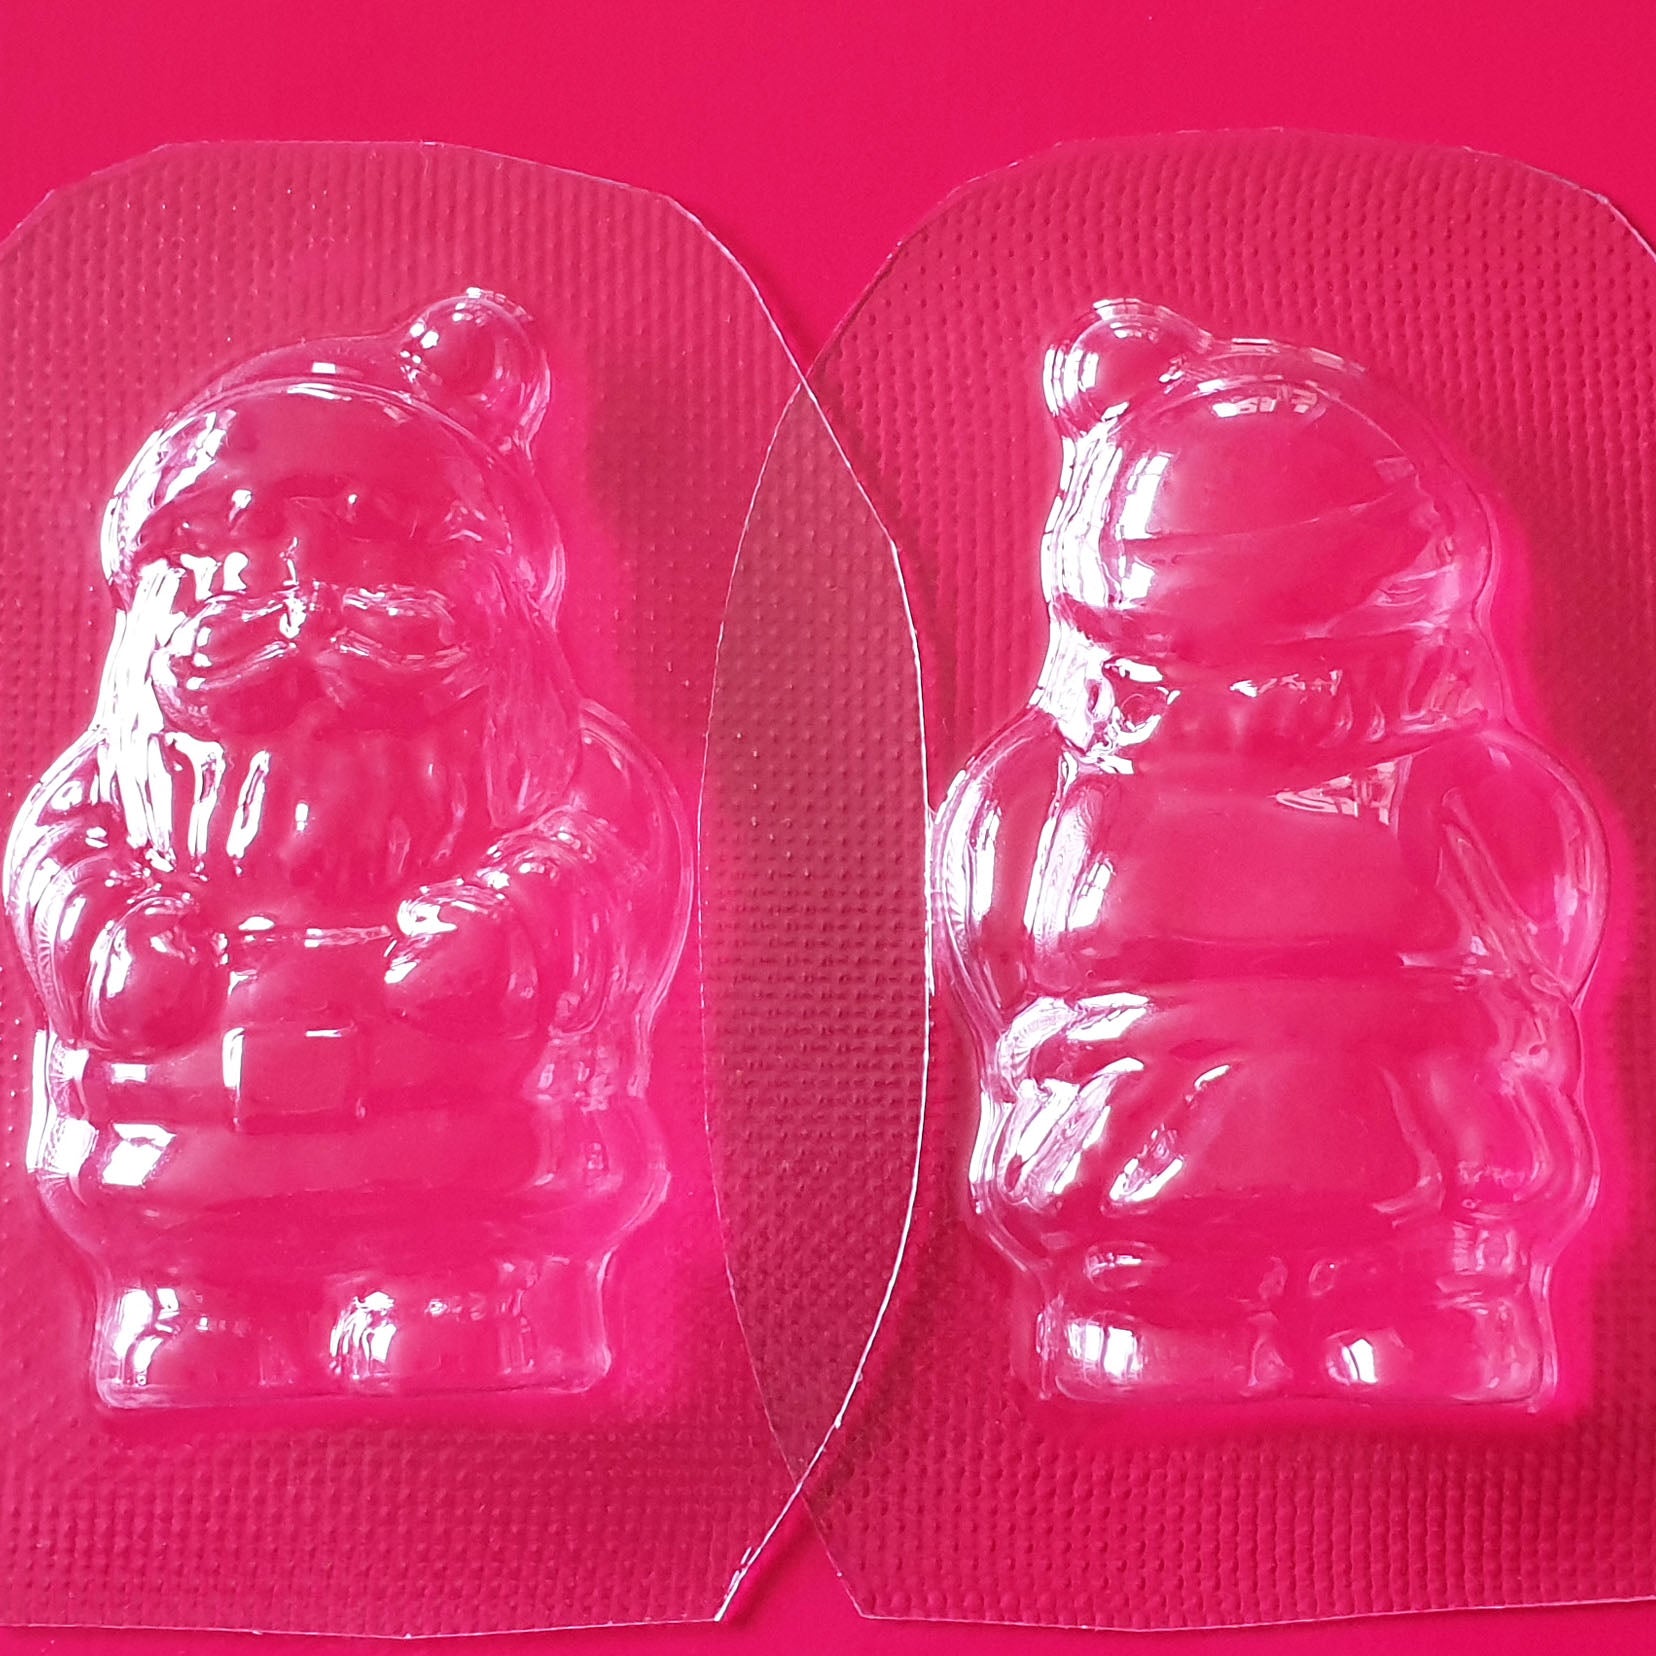 Father Christmas Mould | Truly Personal | Bath Bomb, Soap, Resin, Chocolate, Jelly, Wax Melts Mold